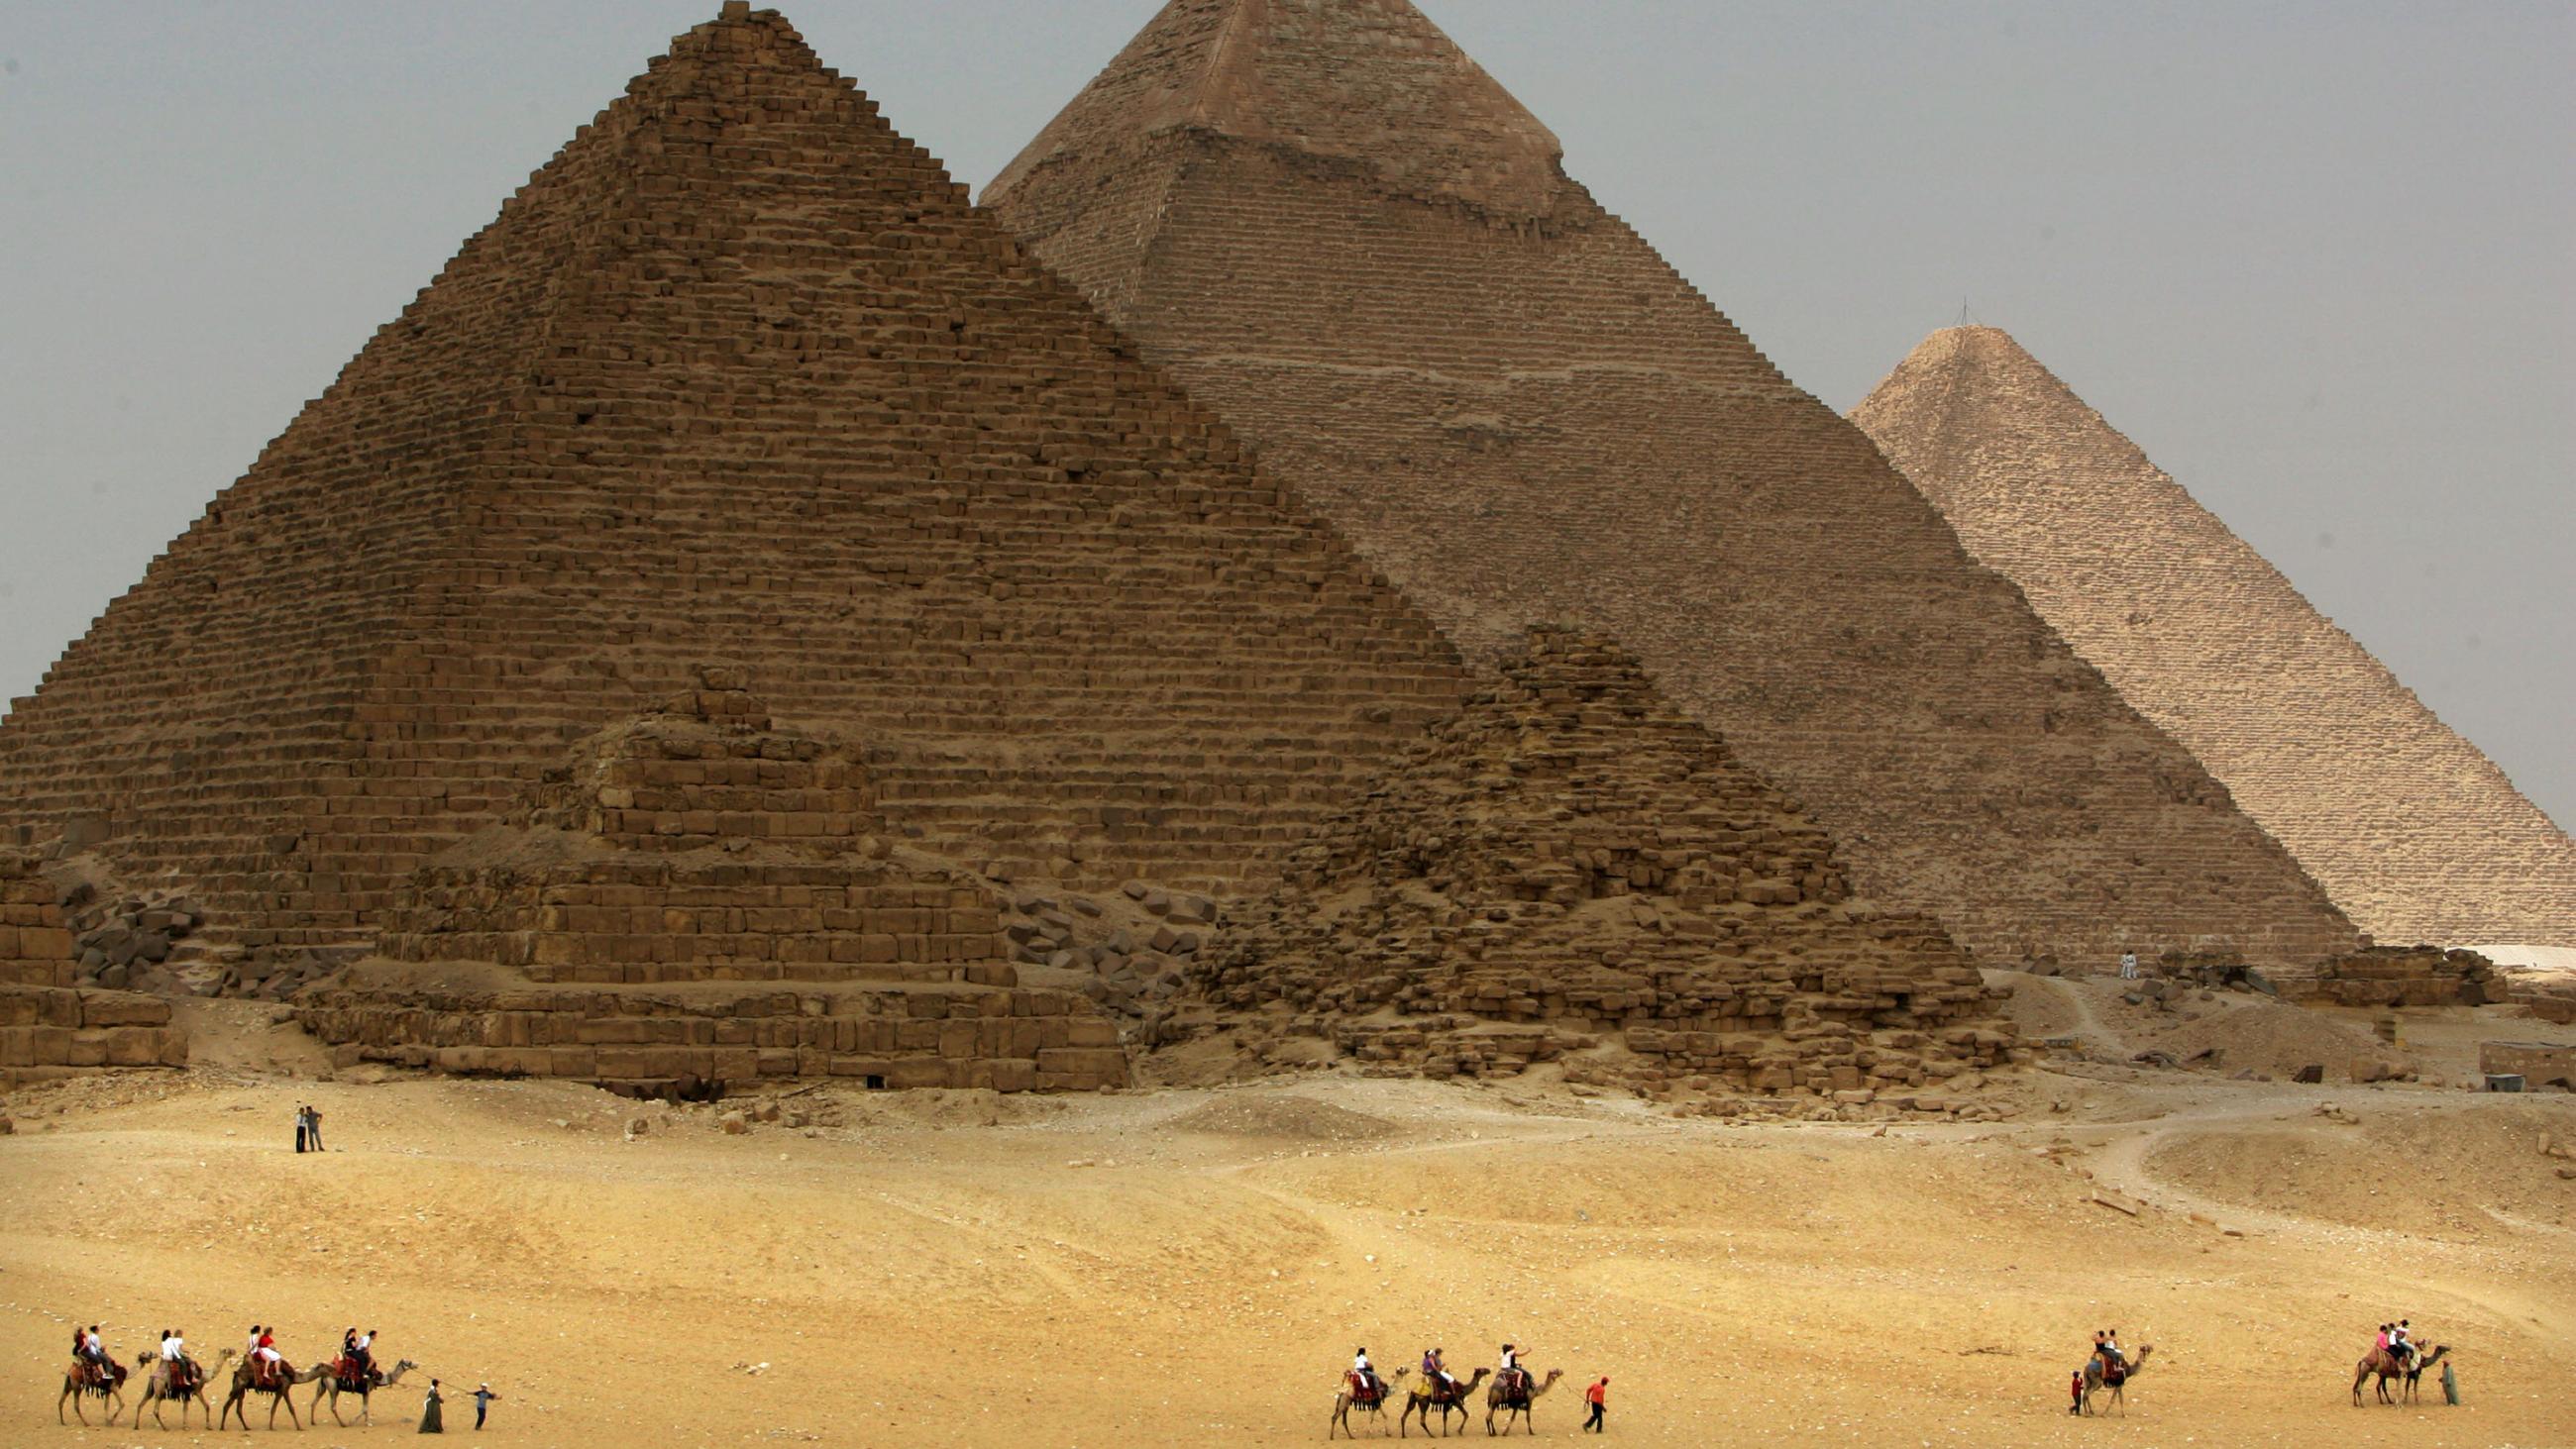 The picture shws the three pyramids off in the distance, taken from a three-quarters angle view. A long line of camels walks in front of the pyramids. 